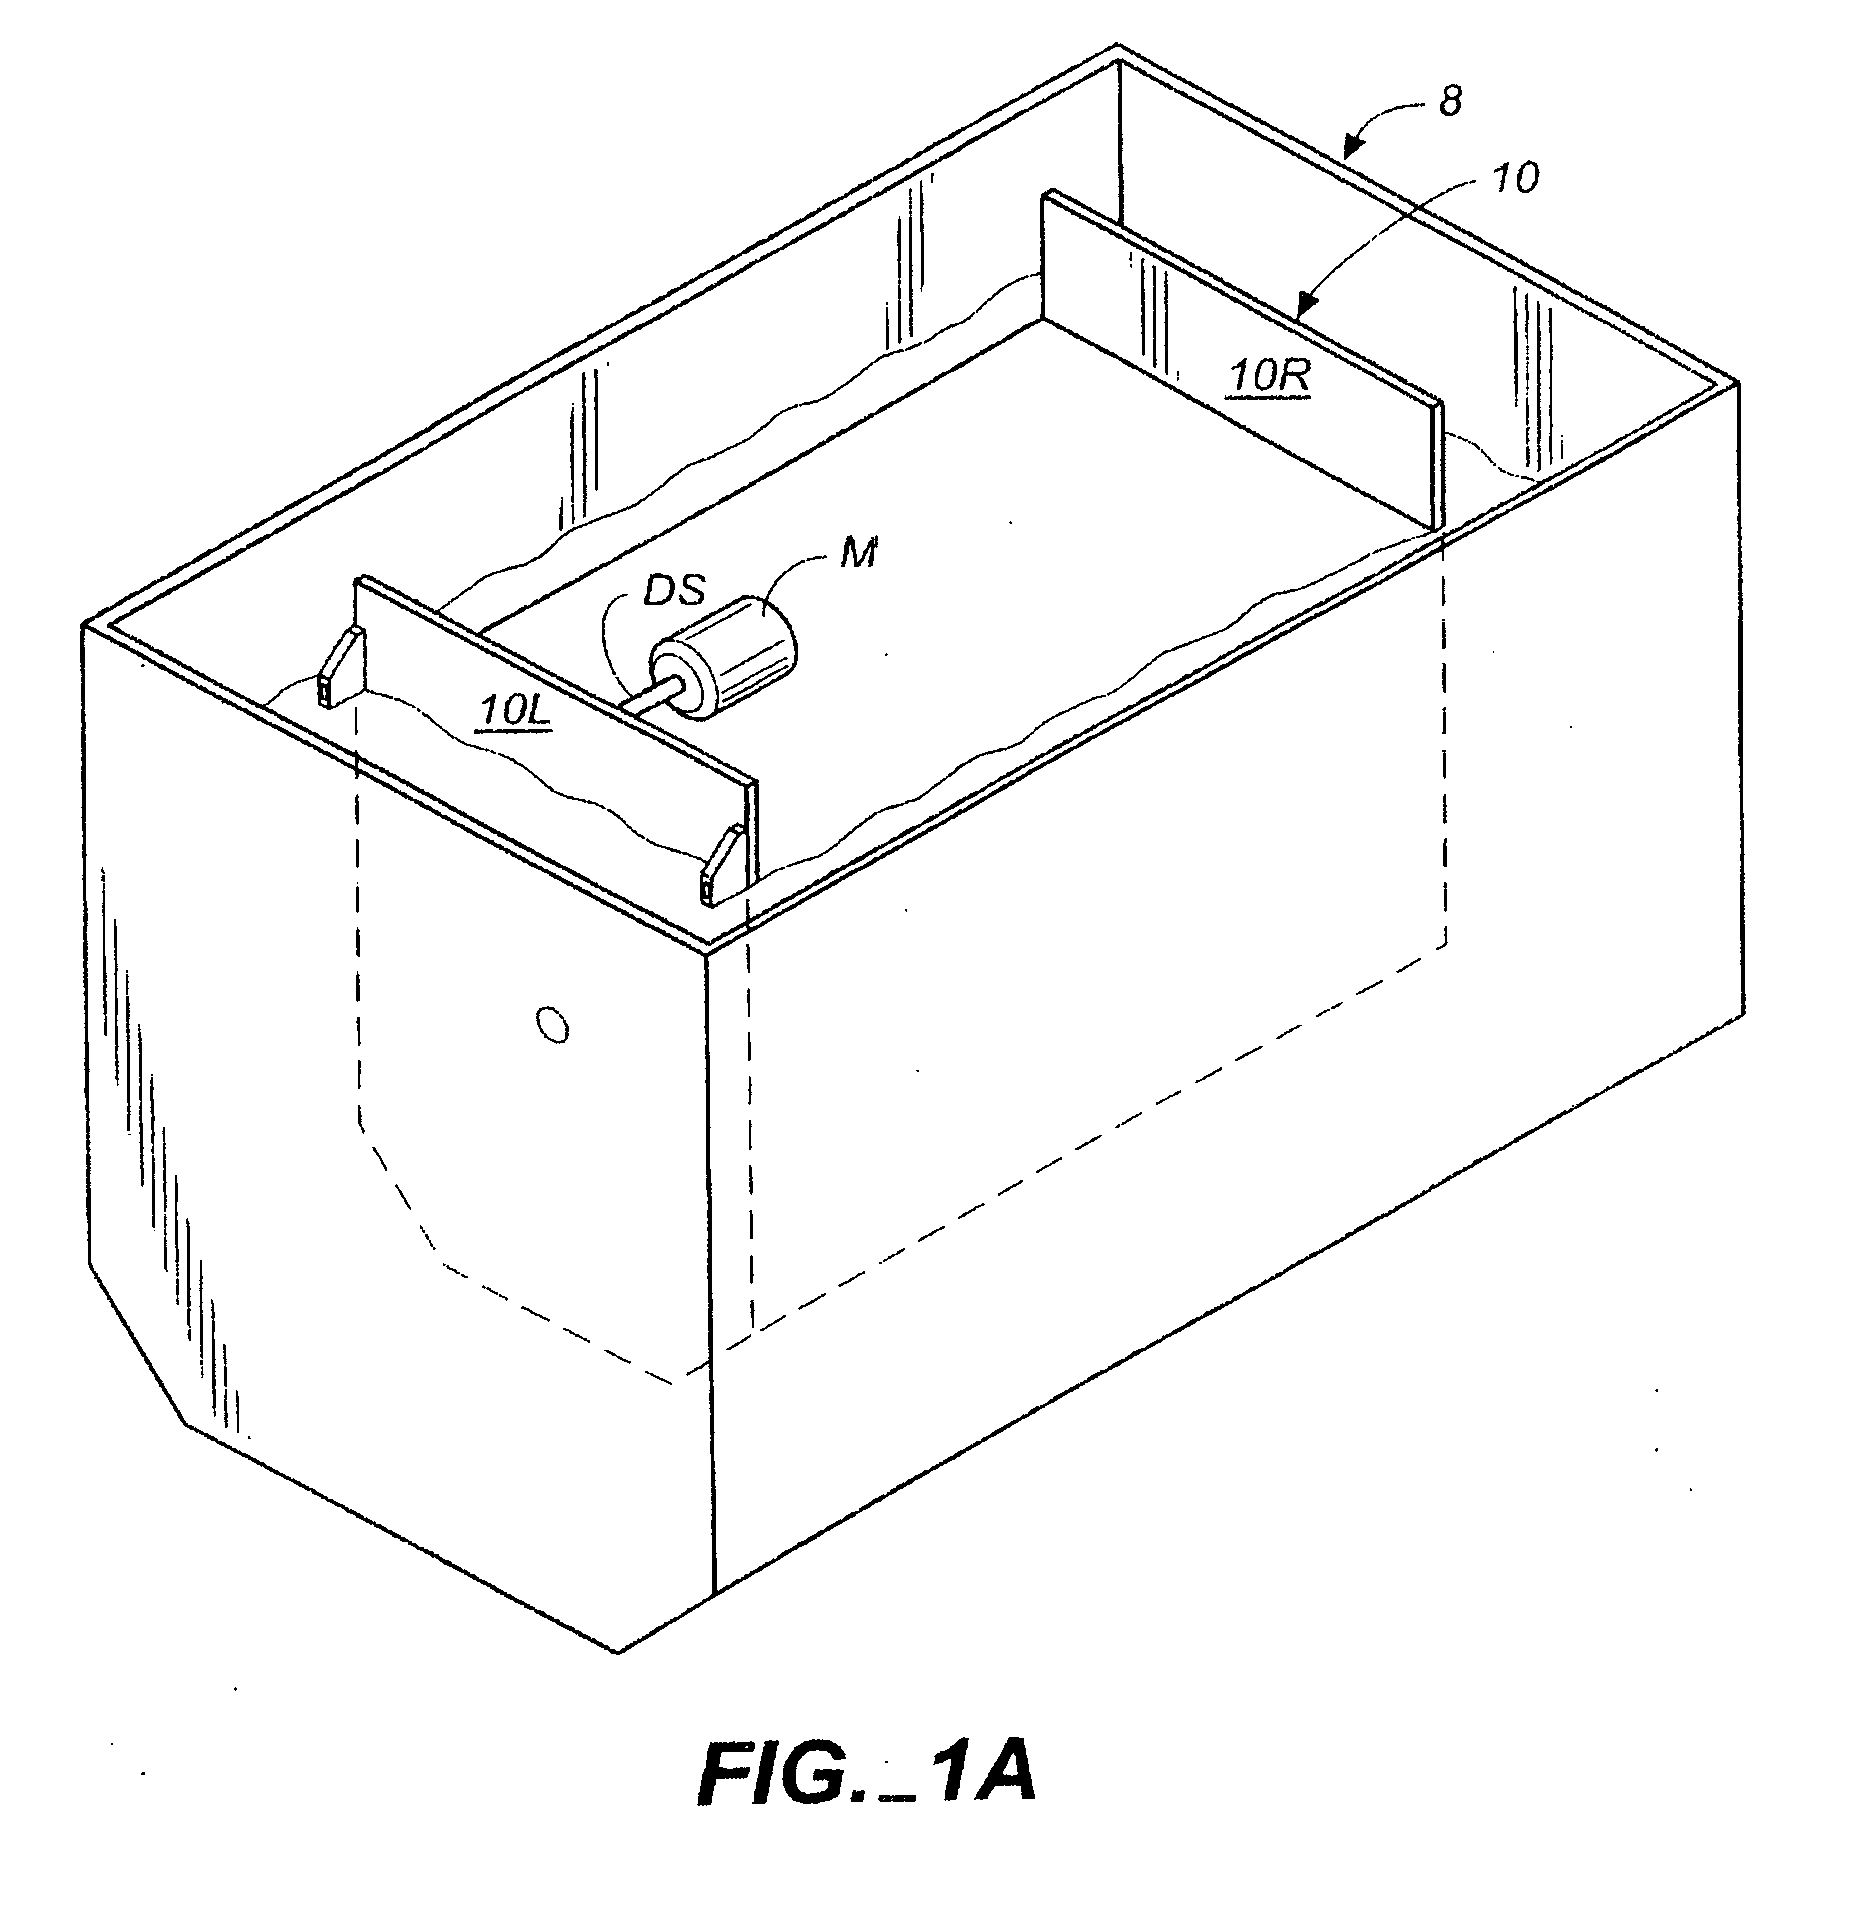 Method and apparatus for plating substrates